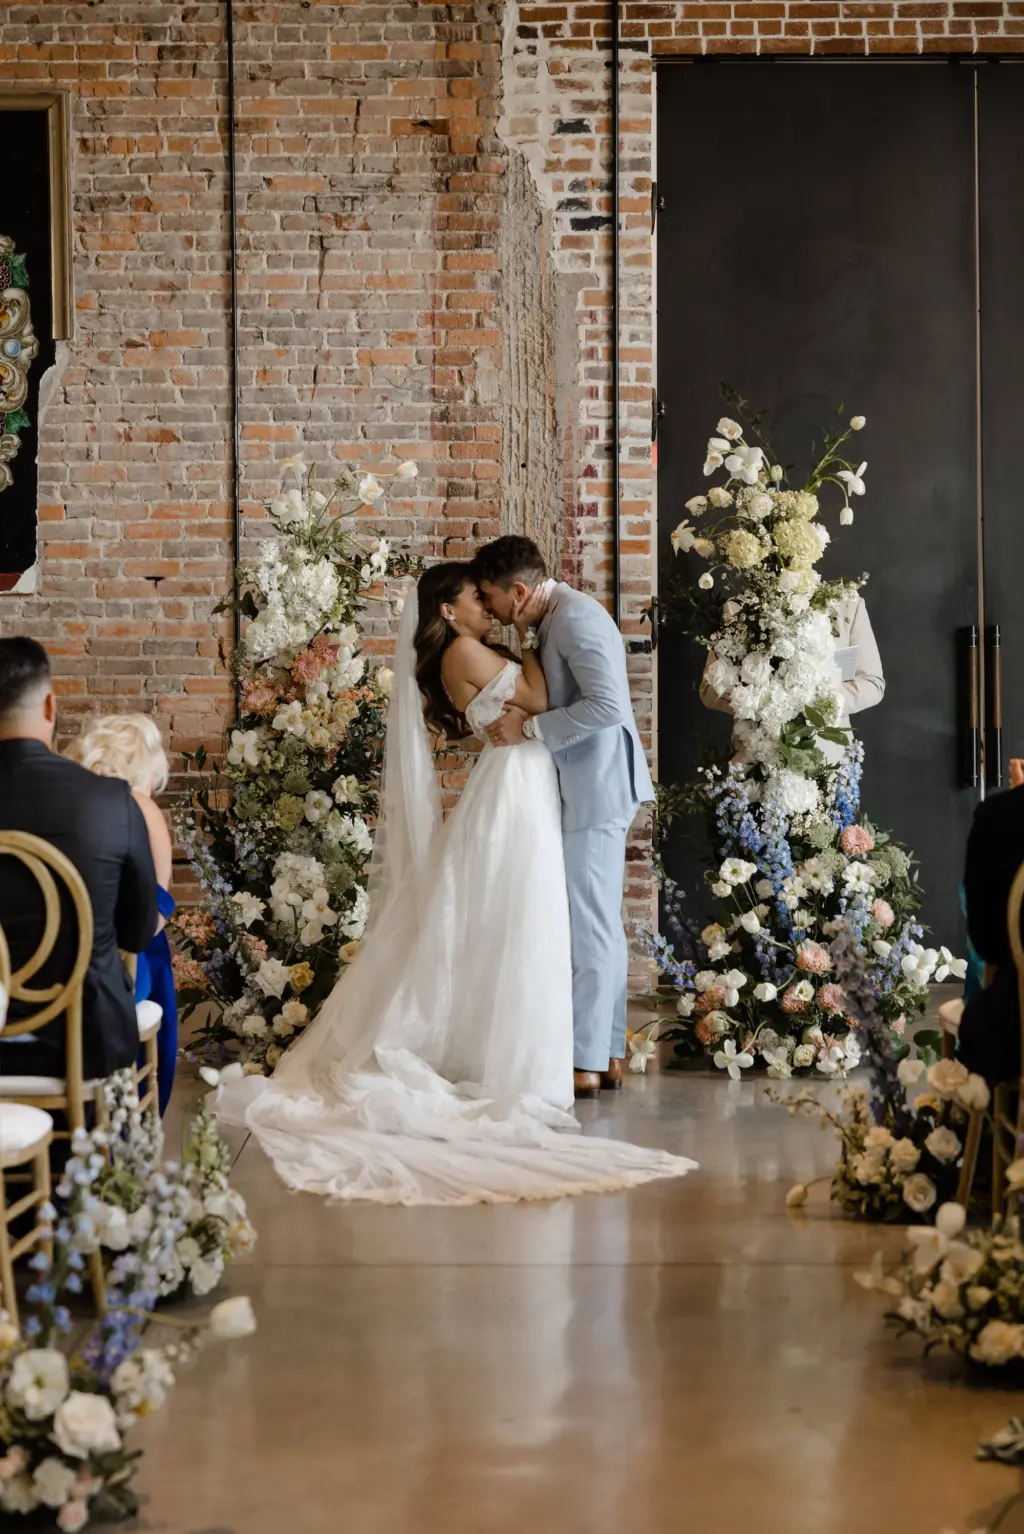 Bride and Groom First Kiss Wedding Portrait | Ybor City Event Venue Hotel Haya | Tampa Bay Planner Coastal Coordinating | Photographer Garry and Stacy Photography Co